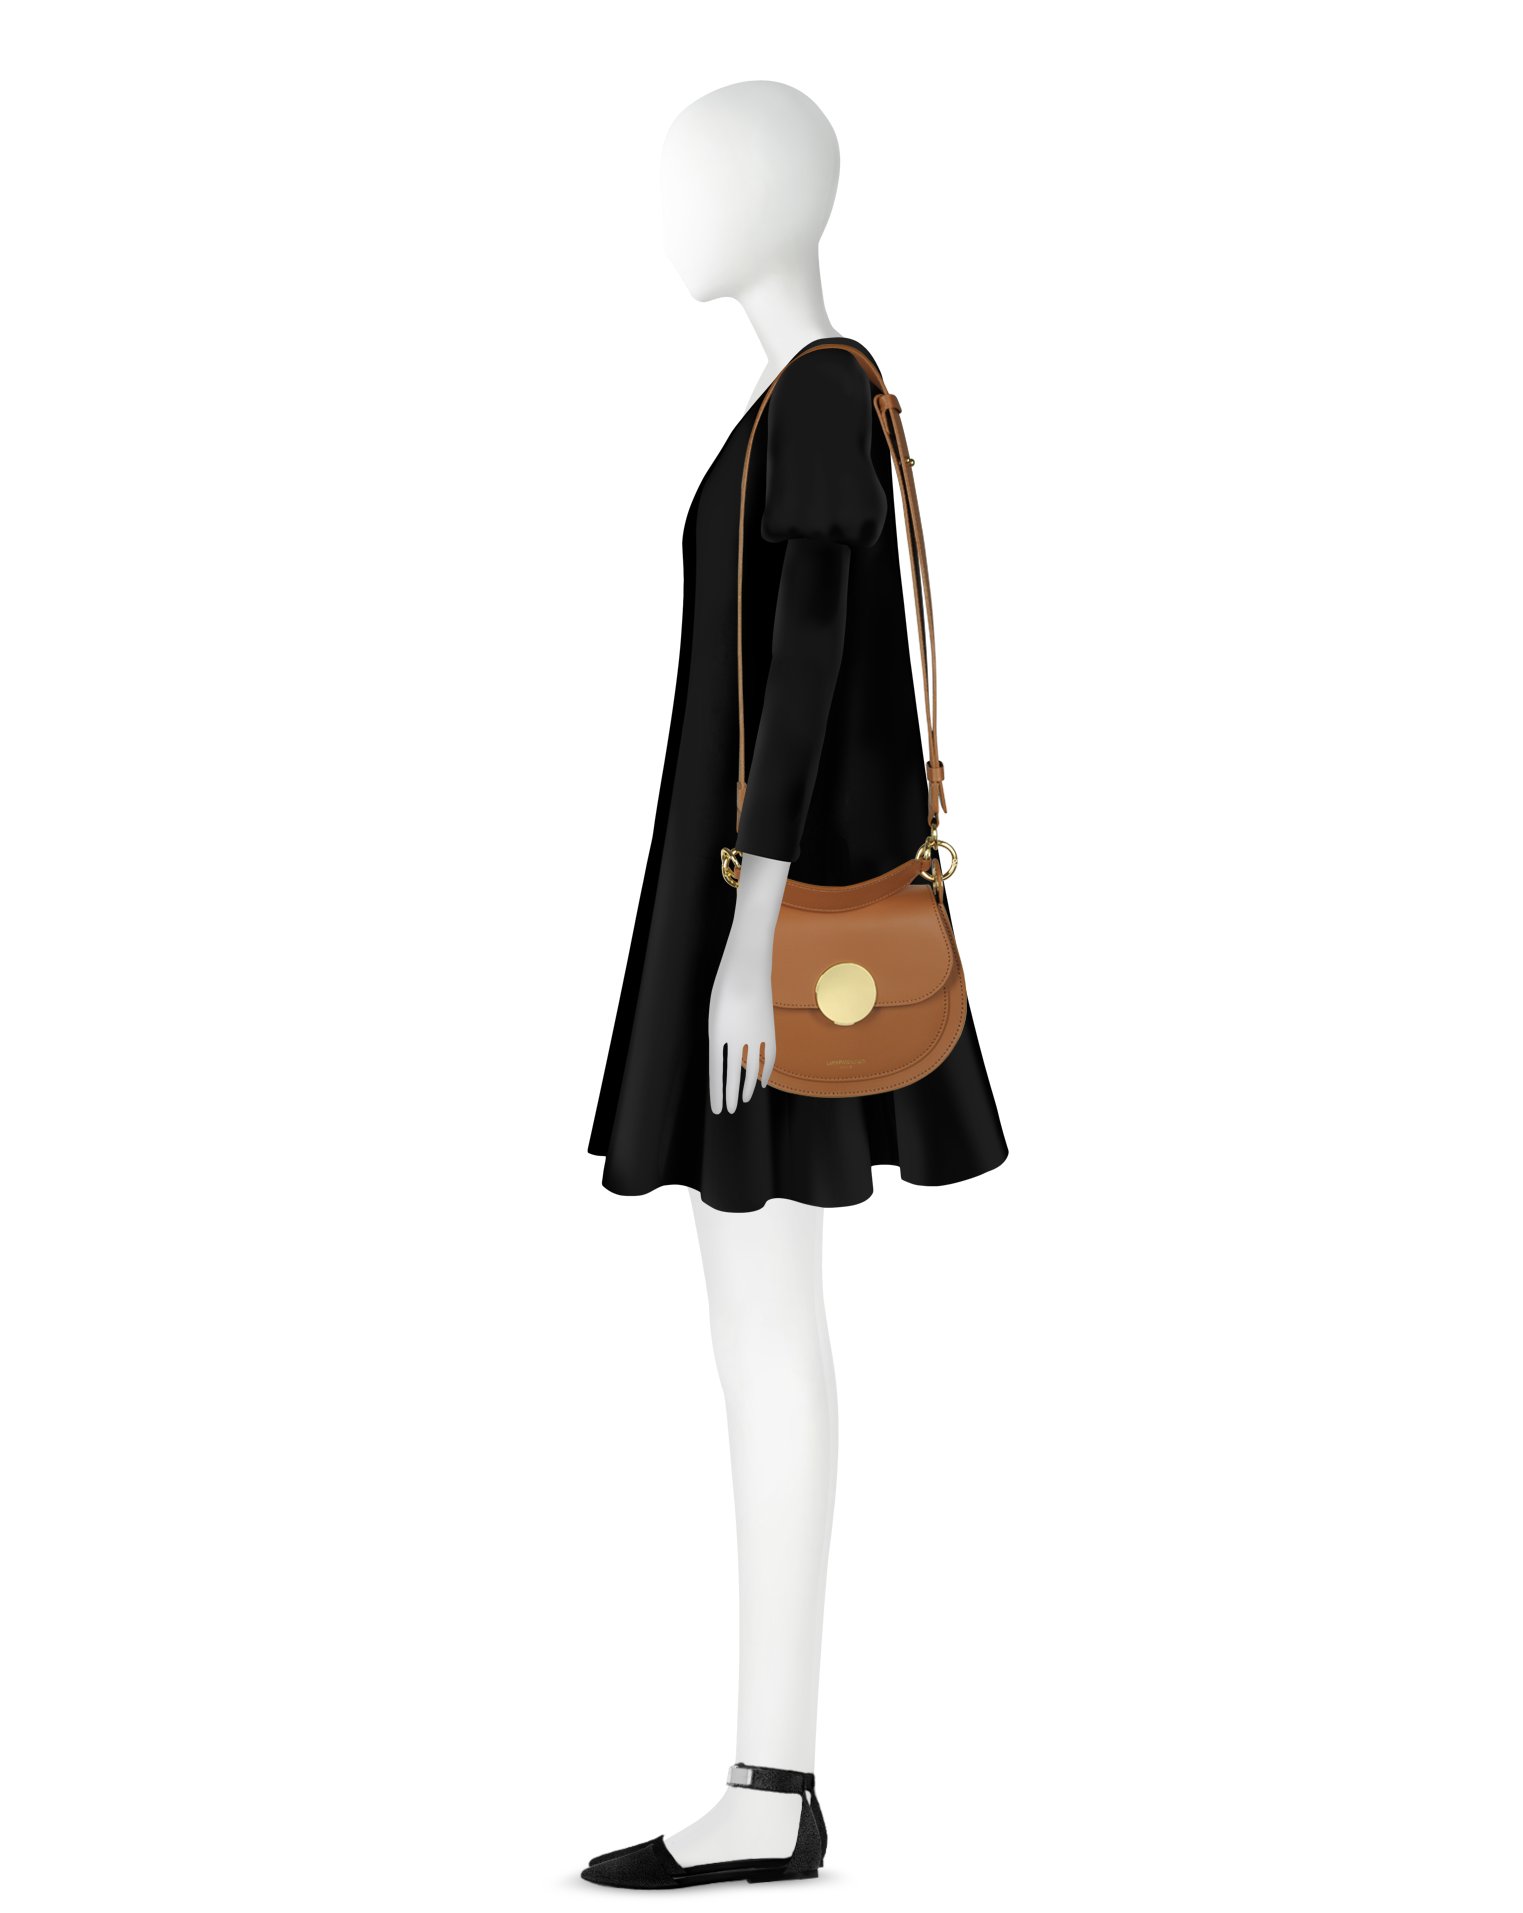 The Yucca Solo Shoulder Bag, from Le Parmentier at Mazzi d Fiori, is made of smooth genuine Italian calf leather and features a modern interpretation of the classic saddle silhouette. It is designed to keep you organised throughout the day and perfect for casual fun nights. The bag includes a top handle, a flap top with a magnetic snap closure and bold hardware detail. There is also a pocket under the flap for additional storage. The wide shoulder strap is adjustable for your comfort. 